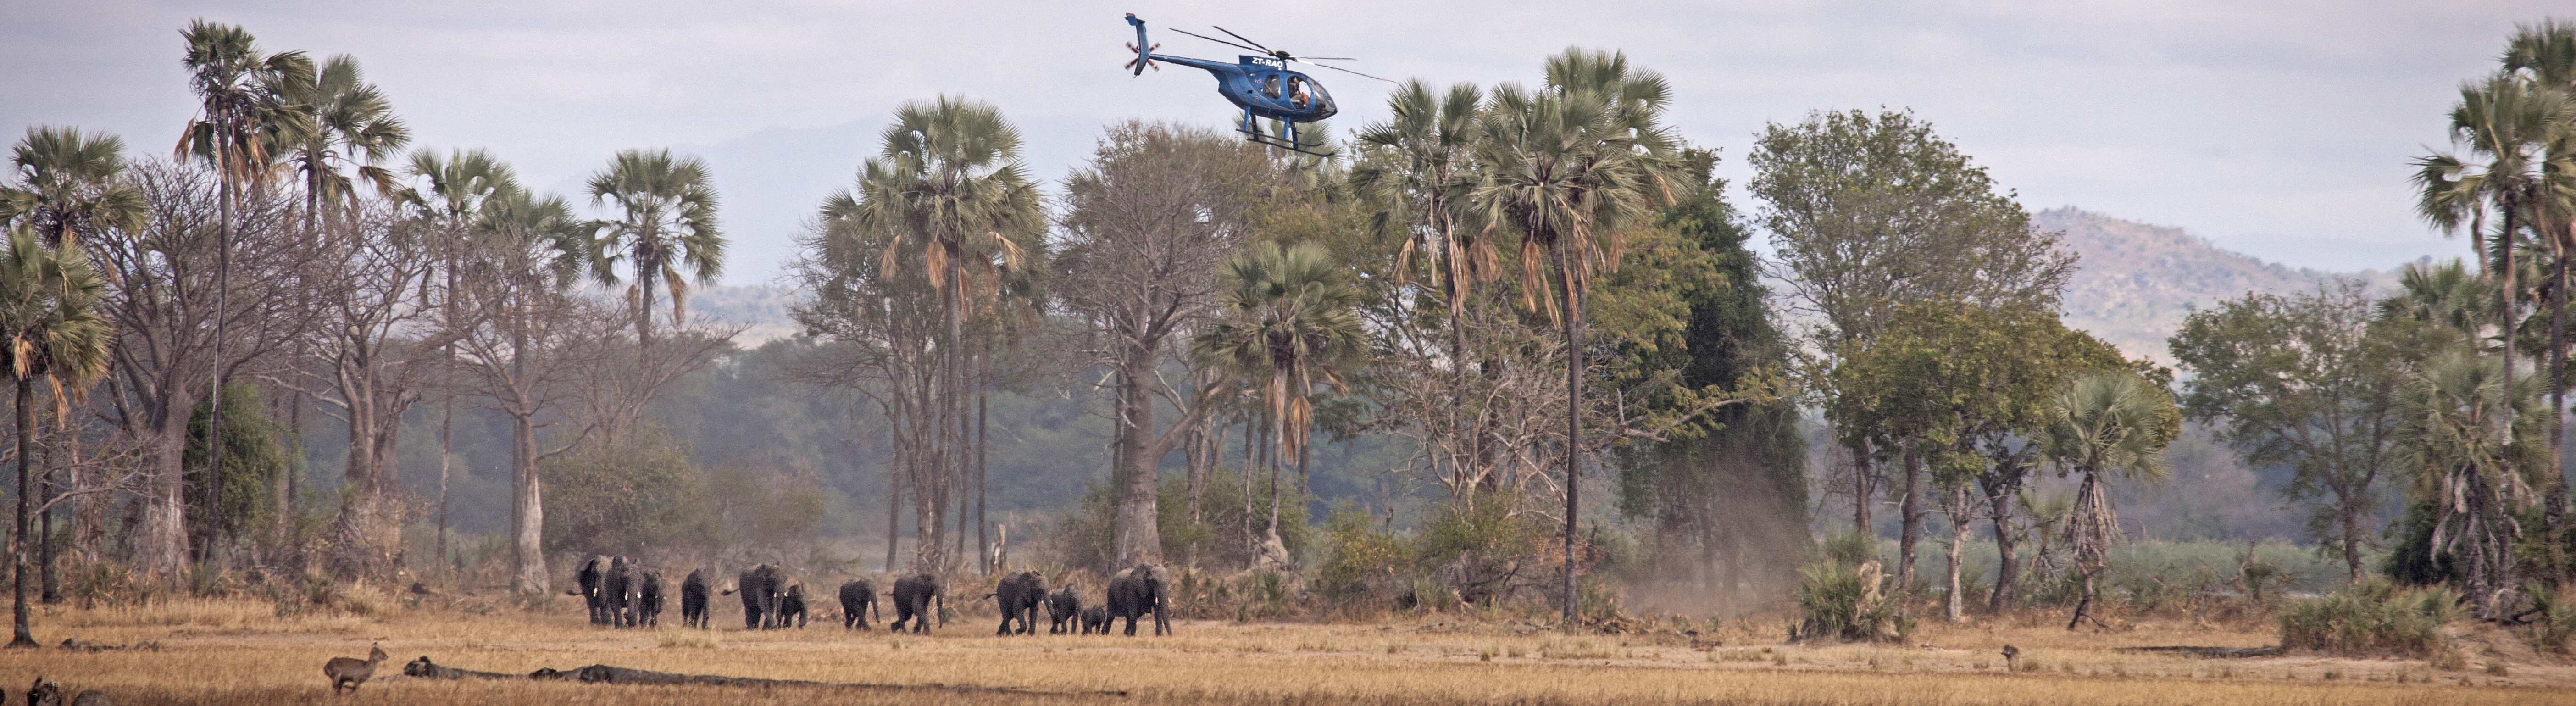 Tranquilizing elephants from helicopter in Liwonde NP | Frank Weitzer for African Parks